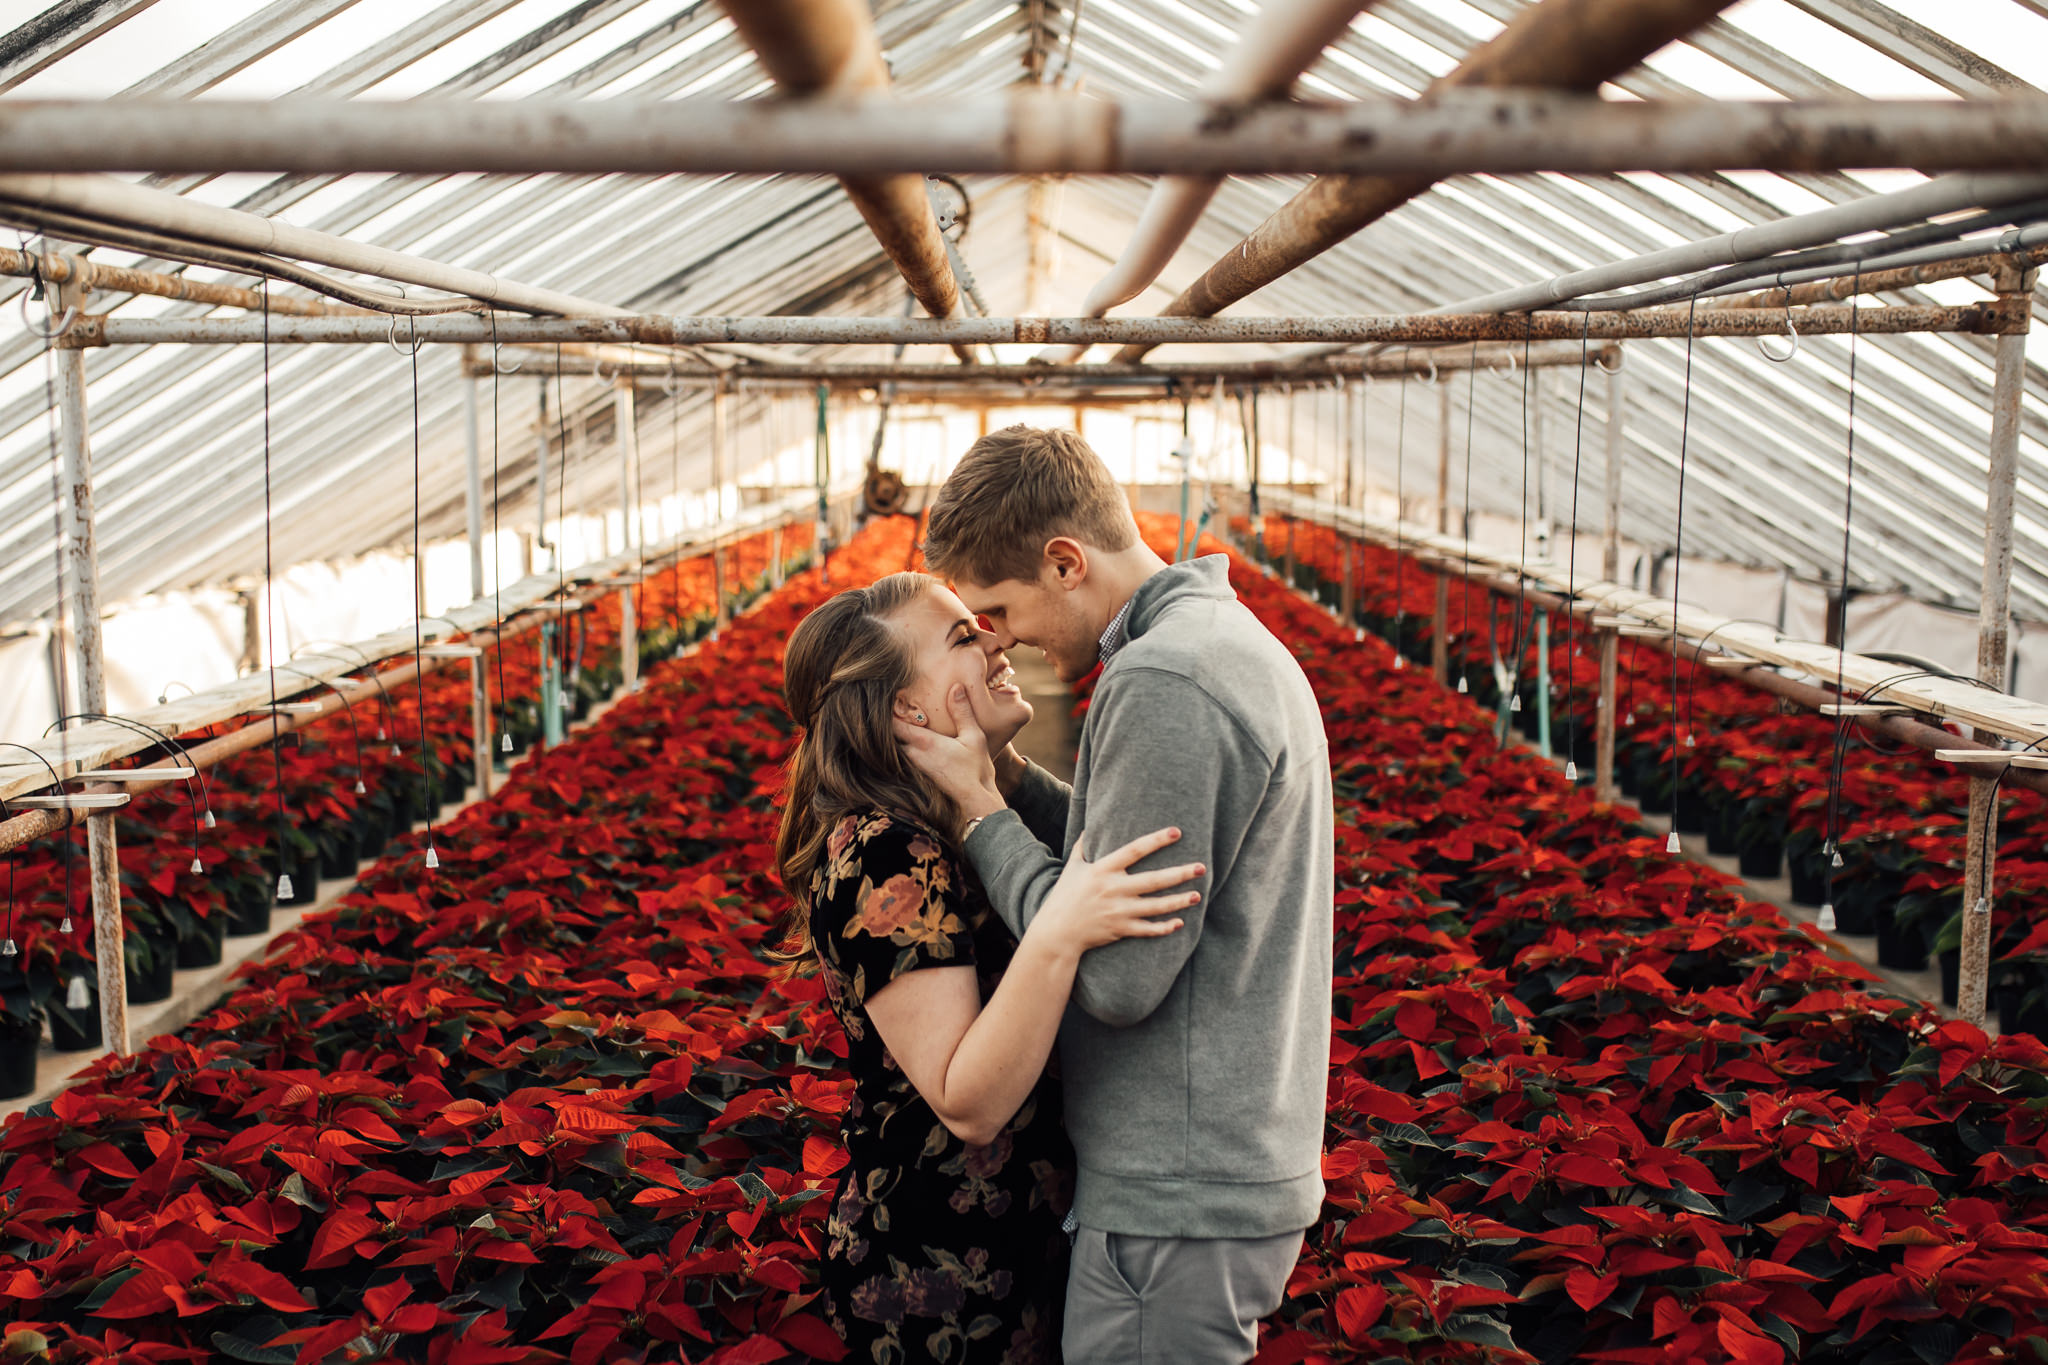 memphis-wedding-photographer-greenhouse-engagement-pictures-cassie-cook-photography-24.jpg